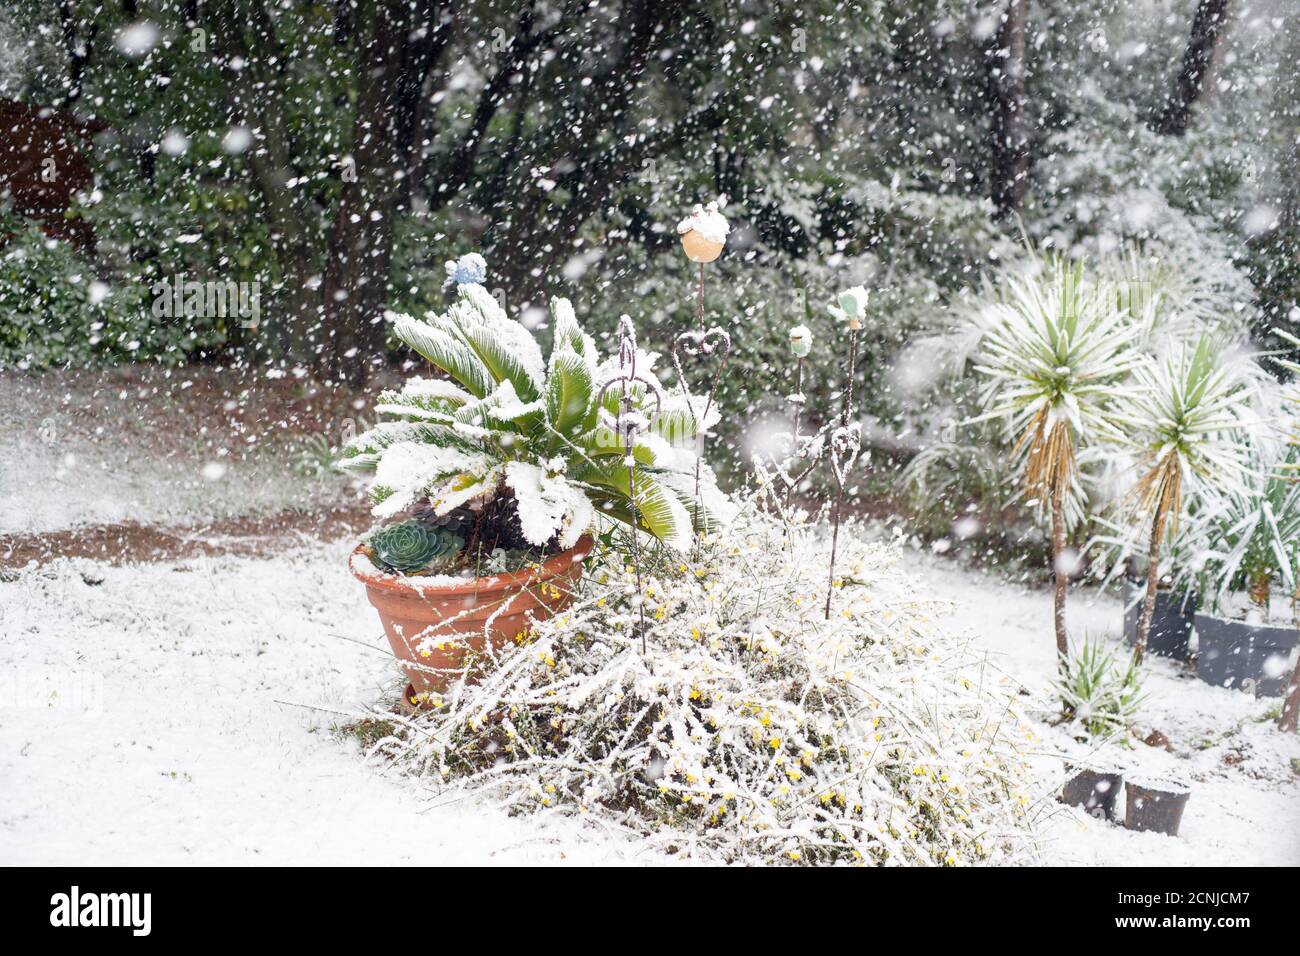 Snow falls on a mediterranean garden in February. Cycas, yuccas, and palm trees in the background covered with white snow. Valbonne, France Stock Photo